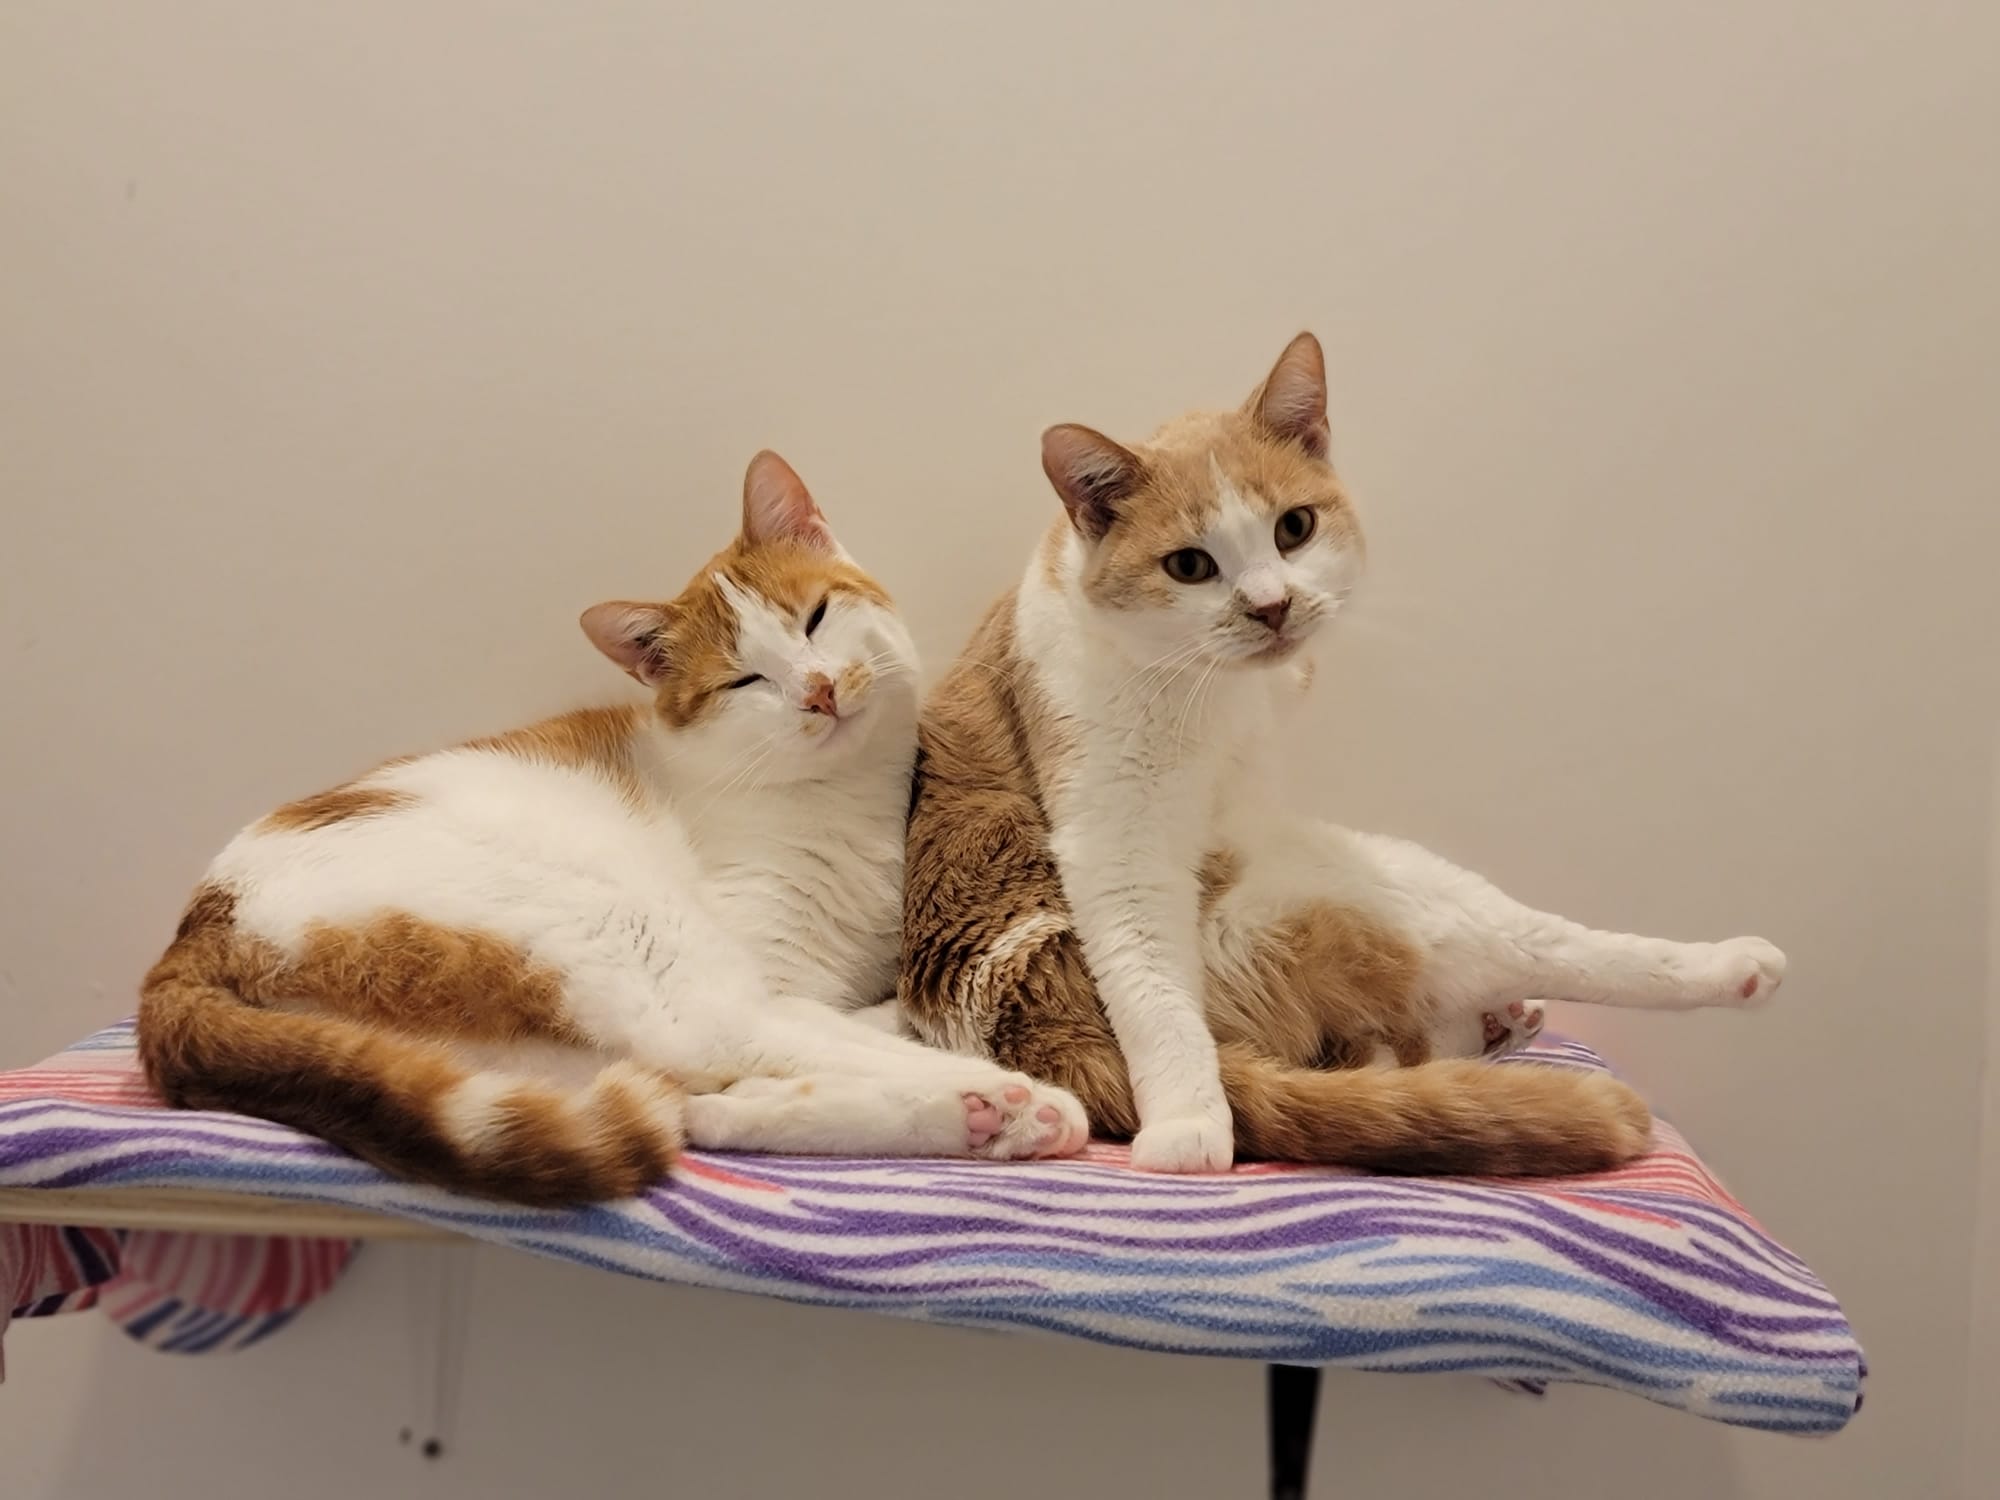 Archie(on the left)|ADOPTED